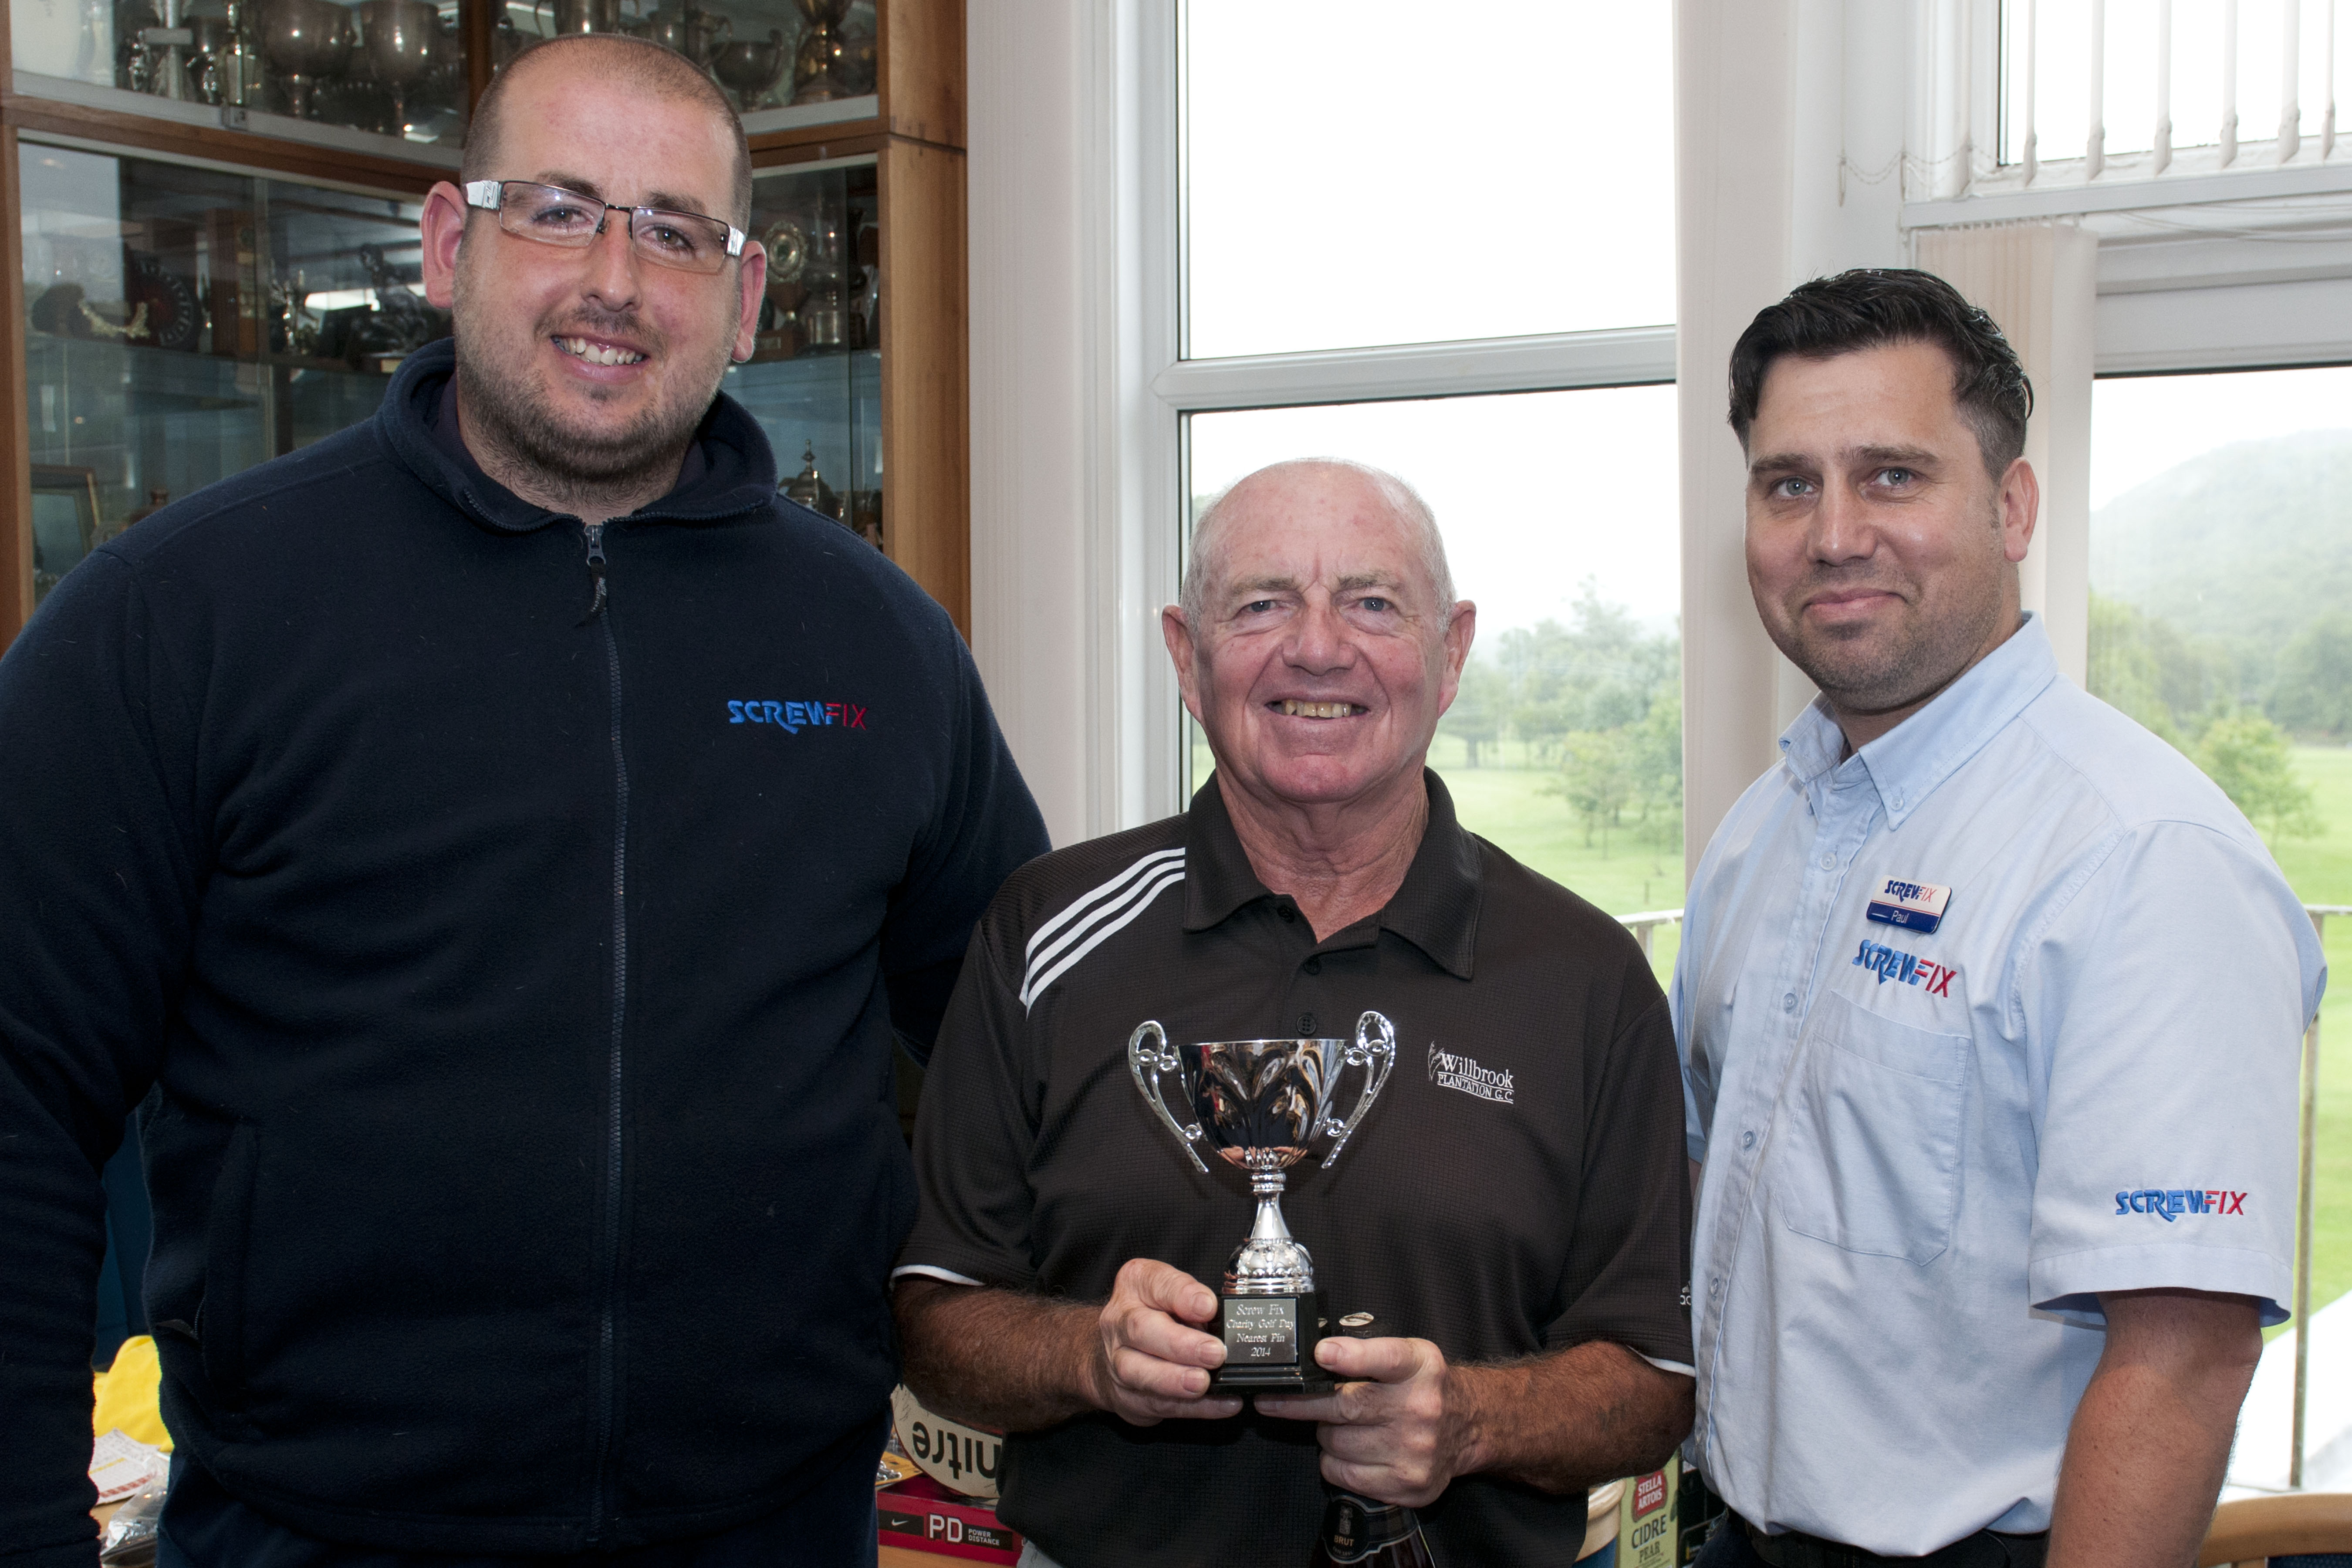 Screwfix employees raise money for The Screwfix Foundation in an 18-hole golf competition